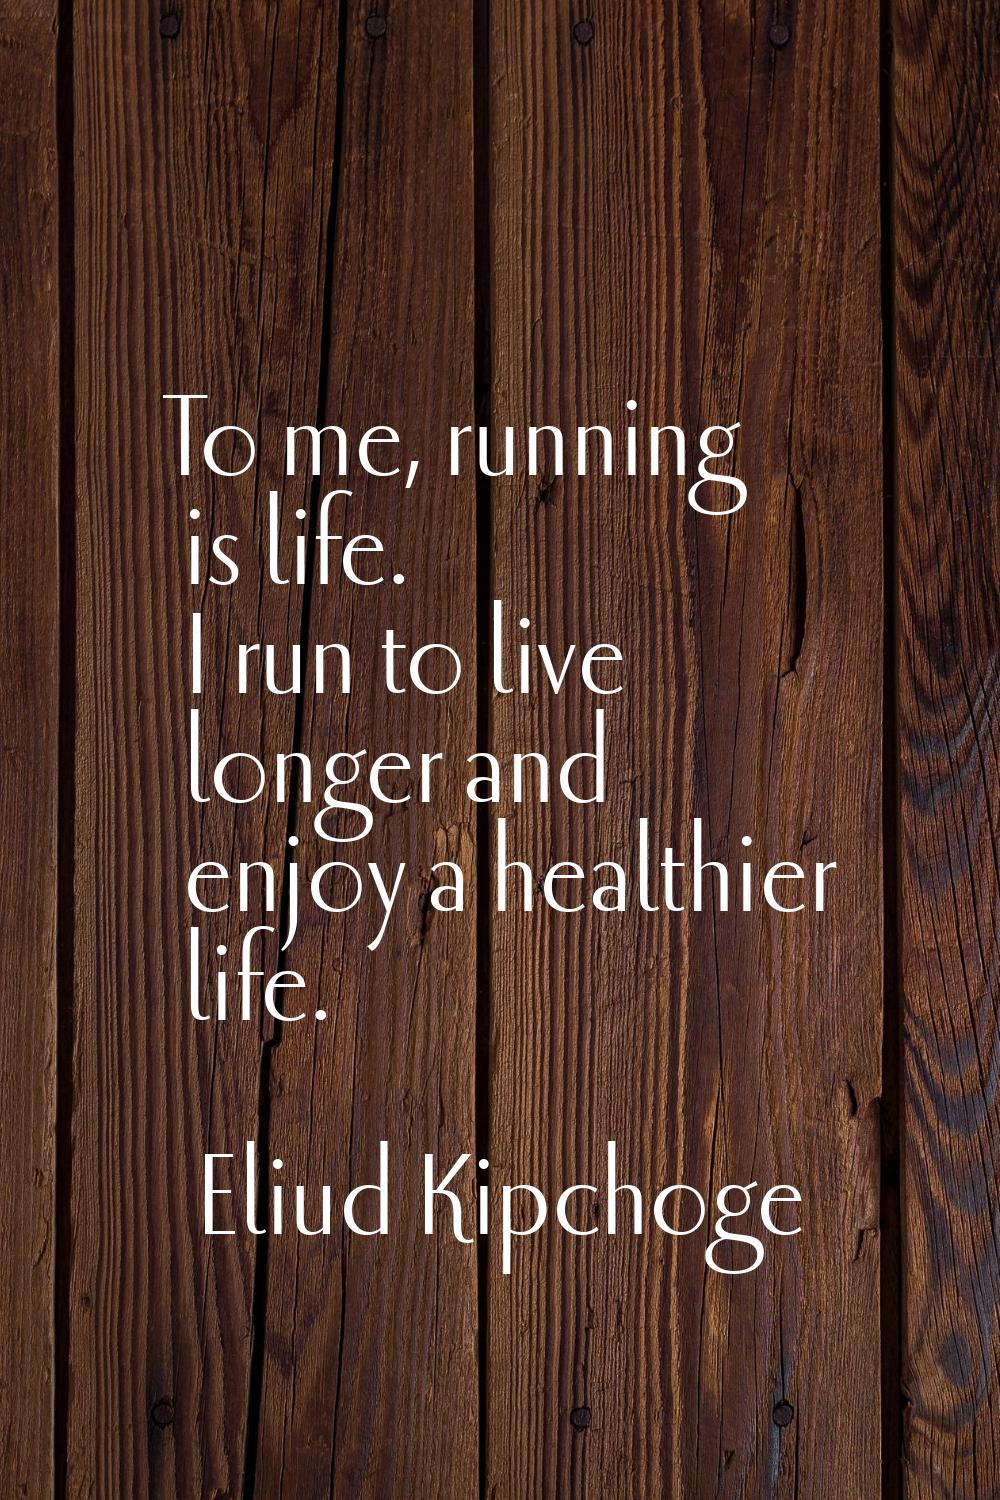 To me, running is life. I run to live longer and enjoy a healthier life.